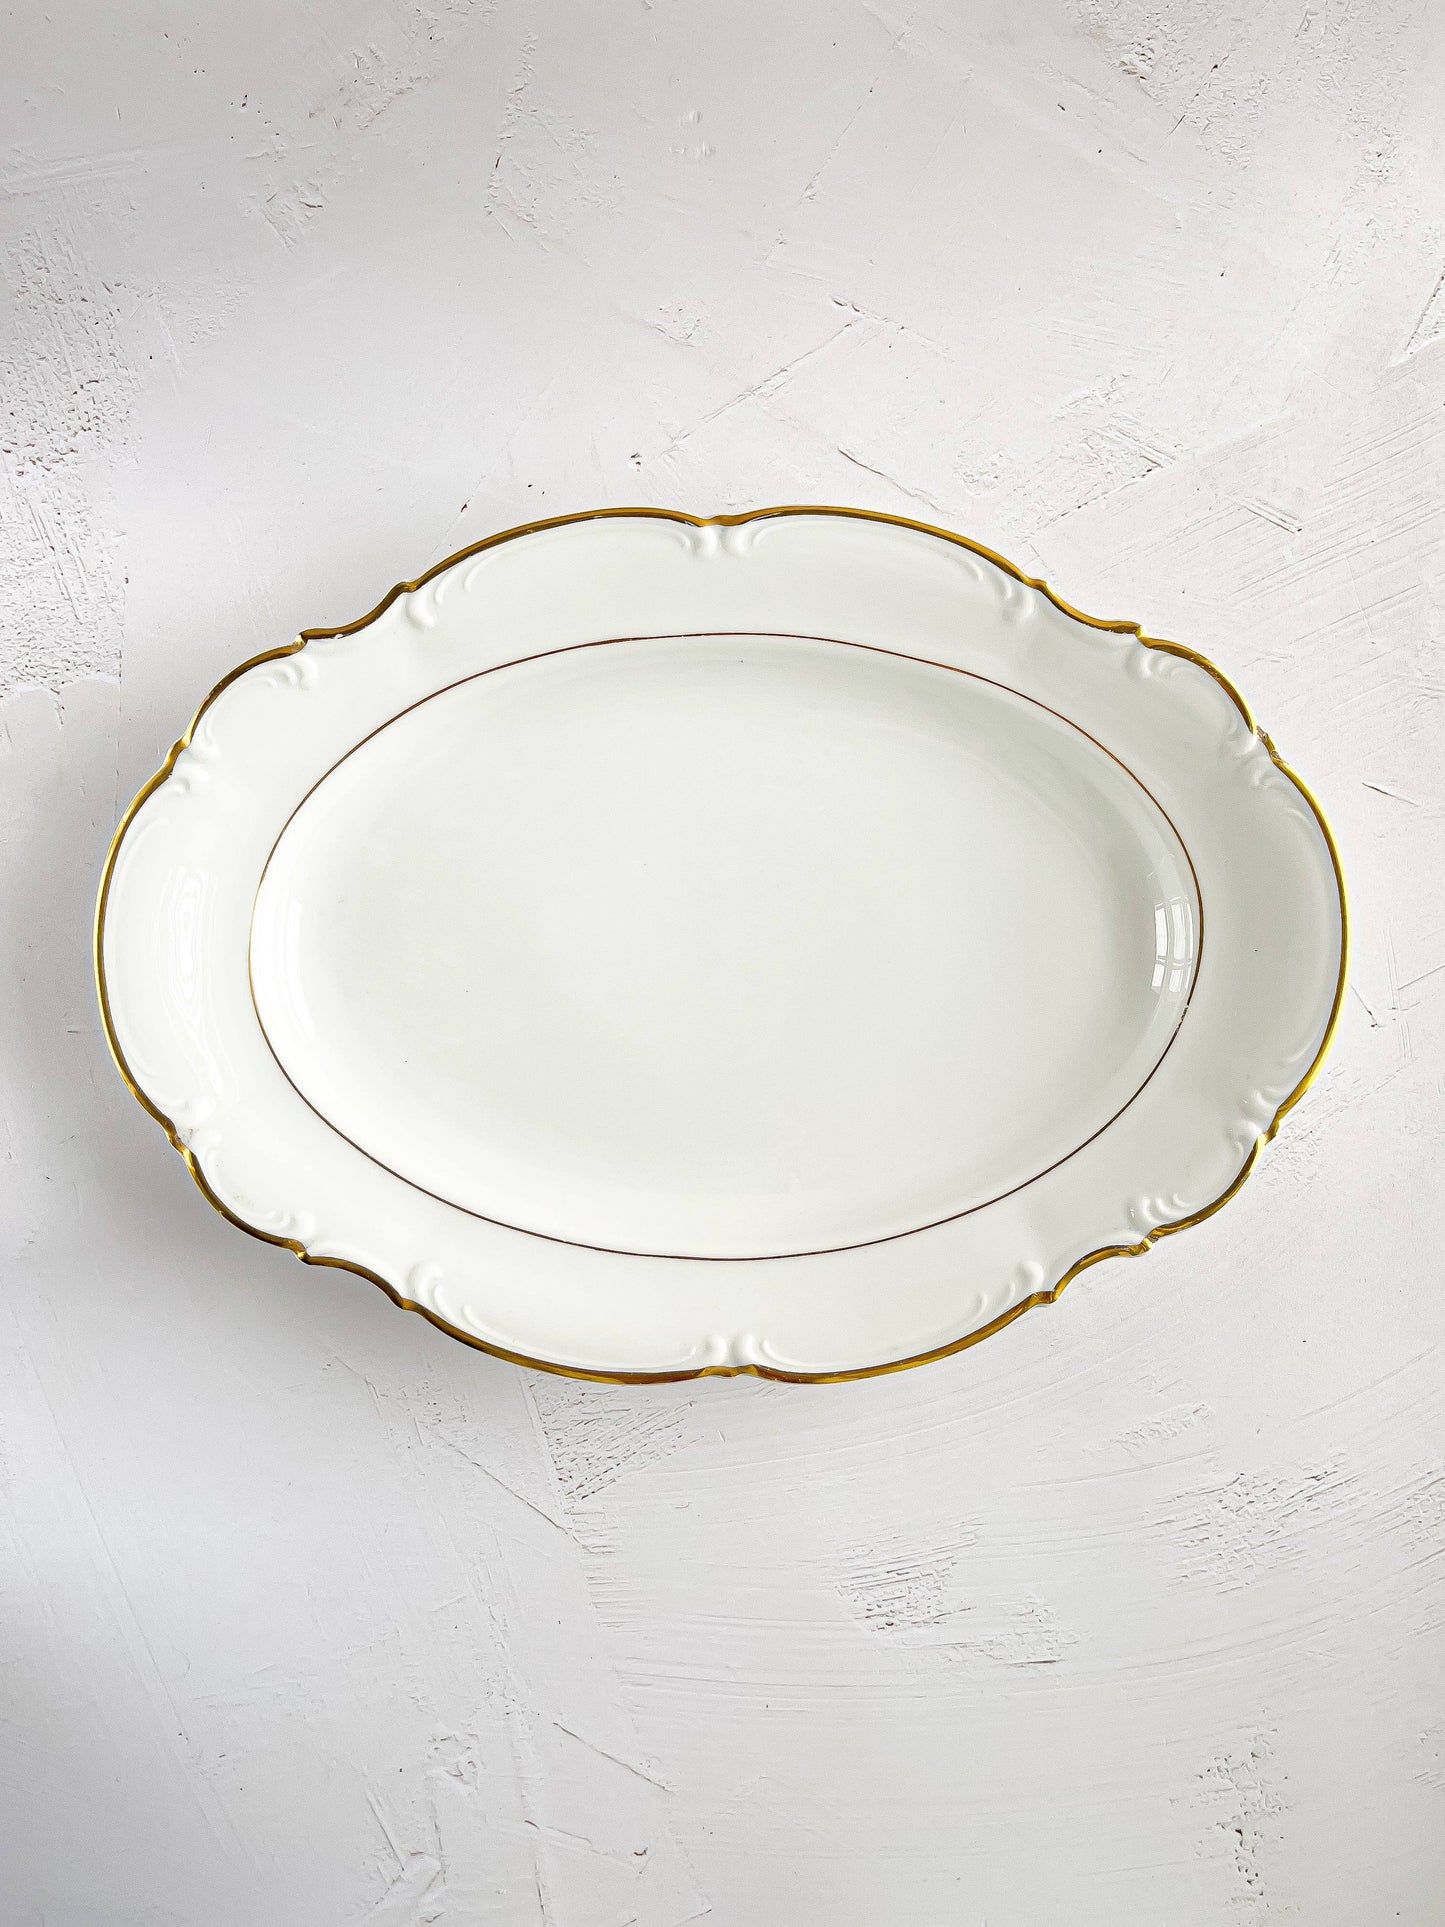 Hutschenreuther 32cm Oval Serving Platter - 'Brighton' Collection - SOSC Home